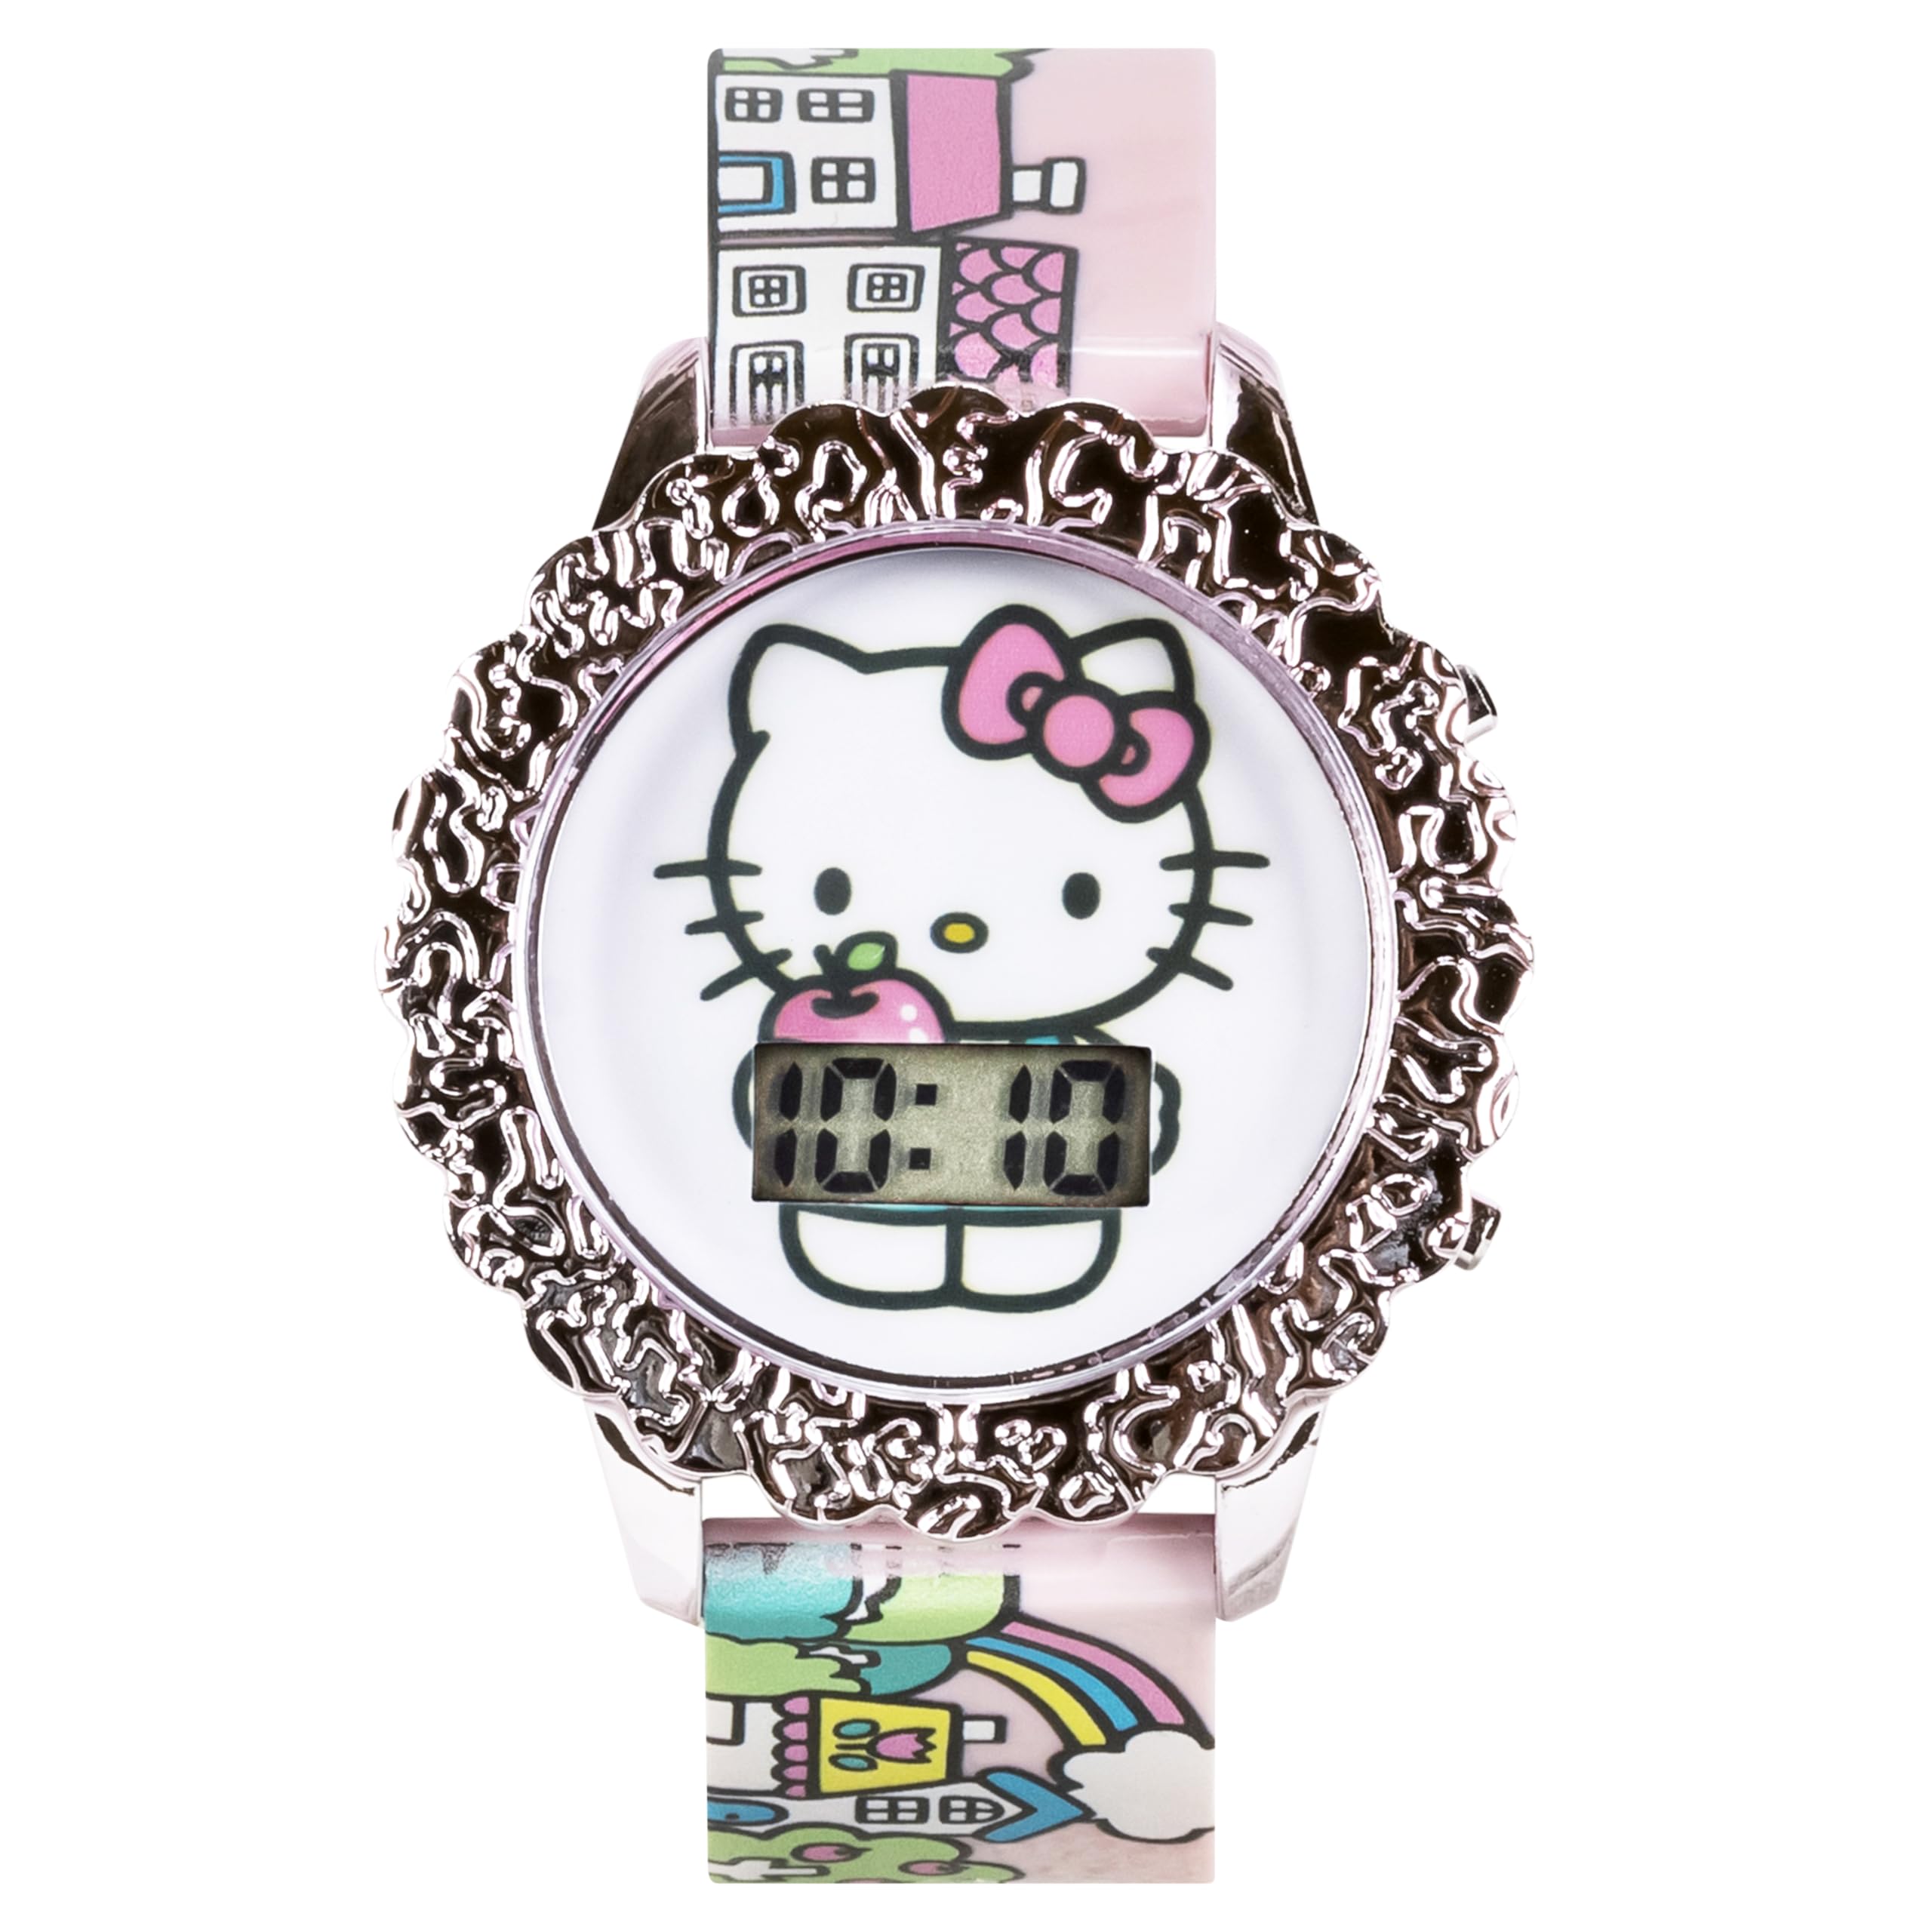 Accutime Hello Kitty Digital LCD Quartz Kids Pink Watch for Girls with Hello Kitty and Friends Pink Band Strap (Model: HK4195AZ)